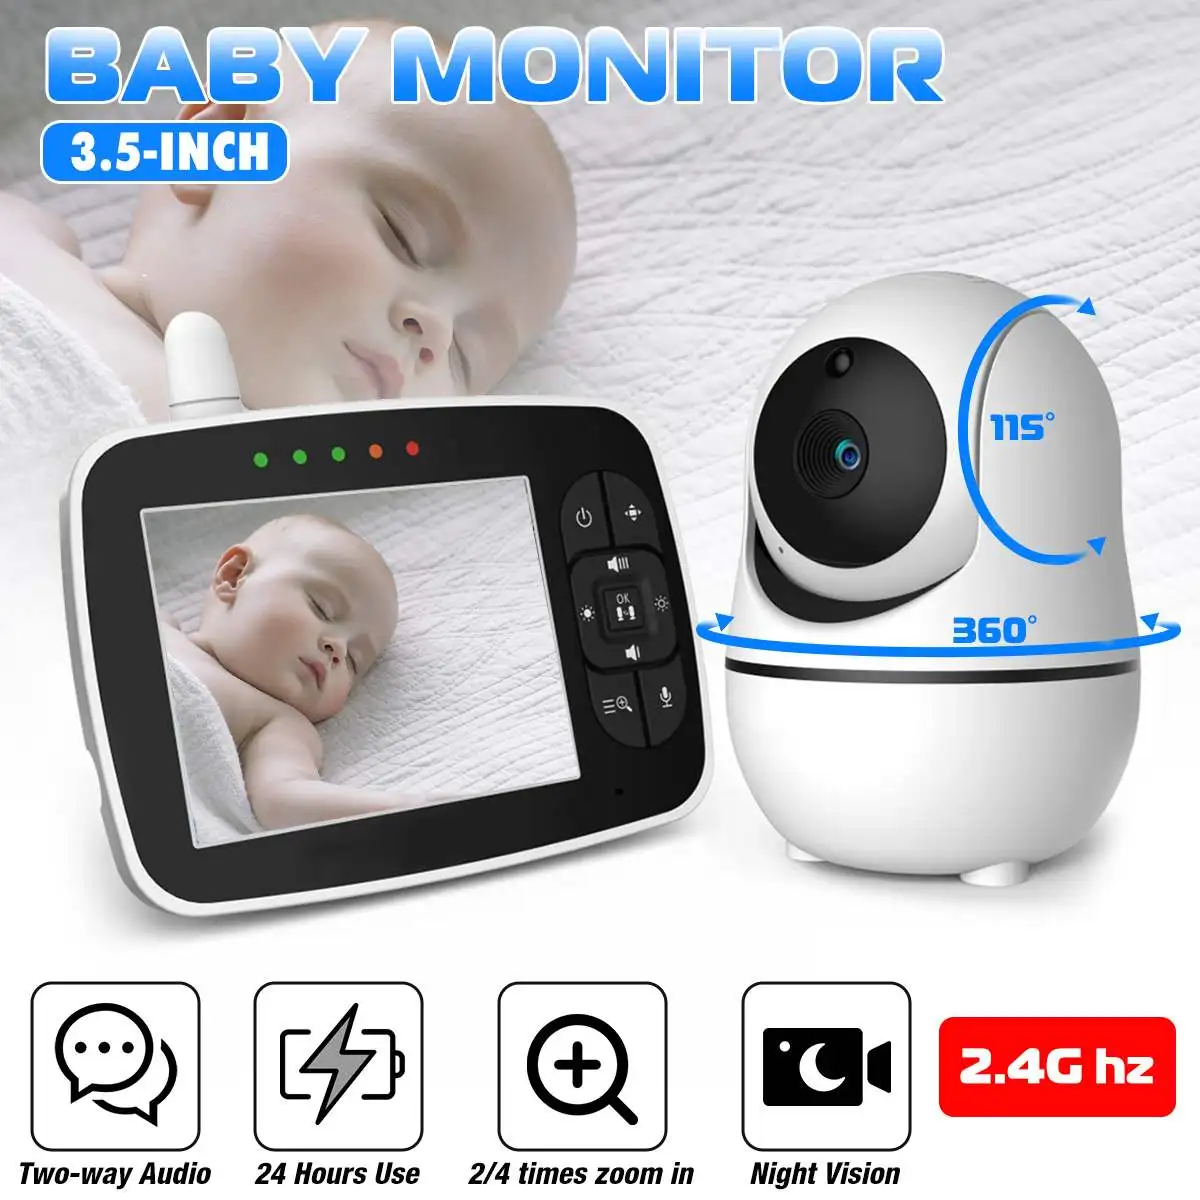 3.5 inch Baby Monitor Video Color Wireless High Resolution Baby Nanny Security Camera Night Vision Temperature Monitoring 2.4G